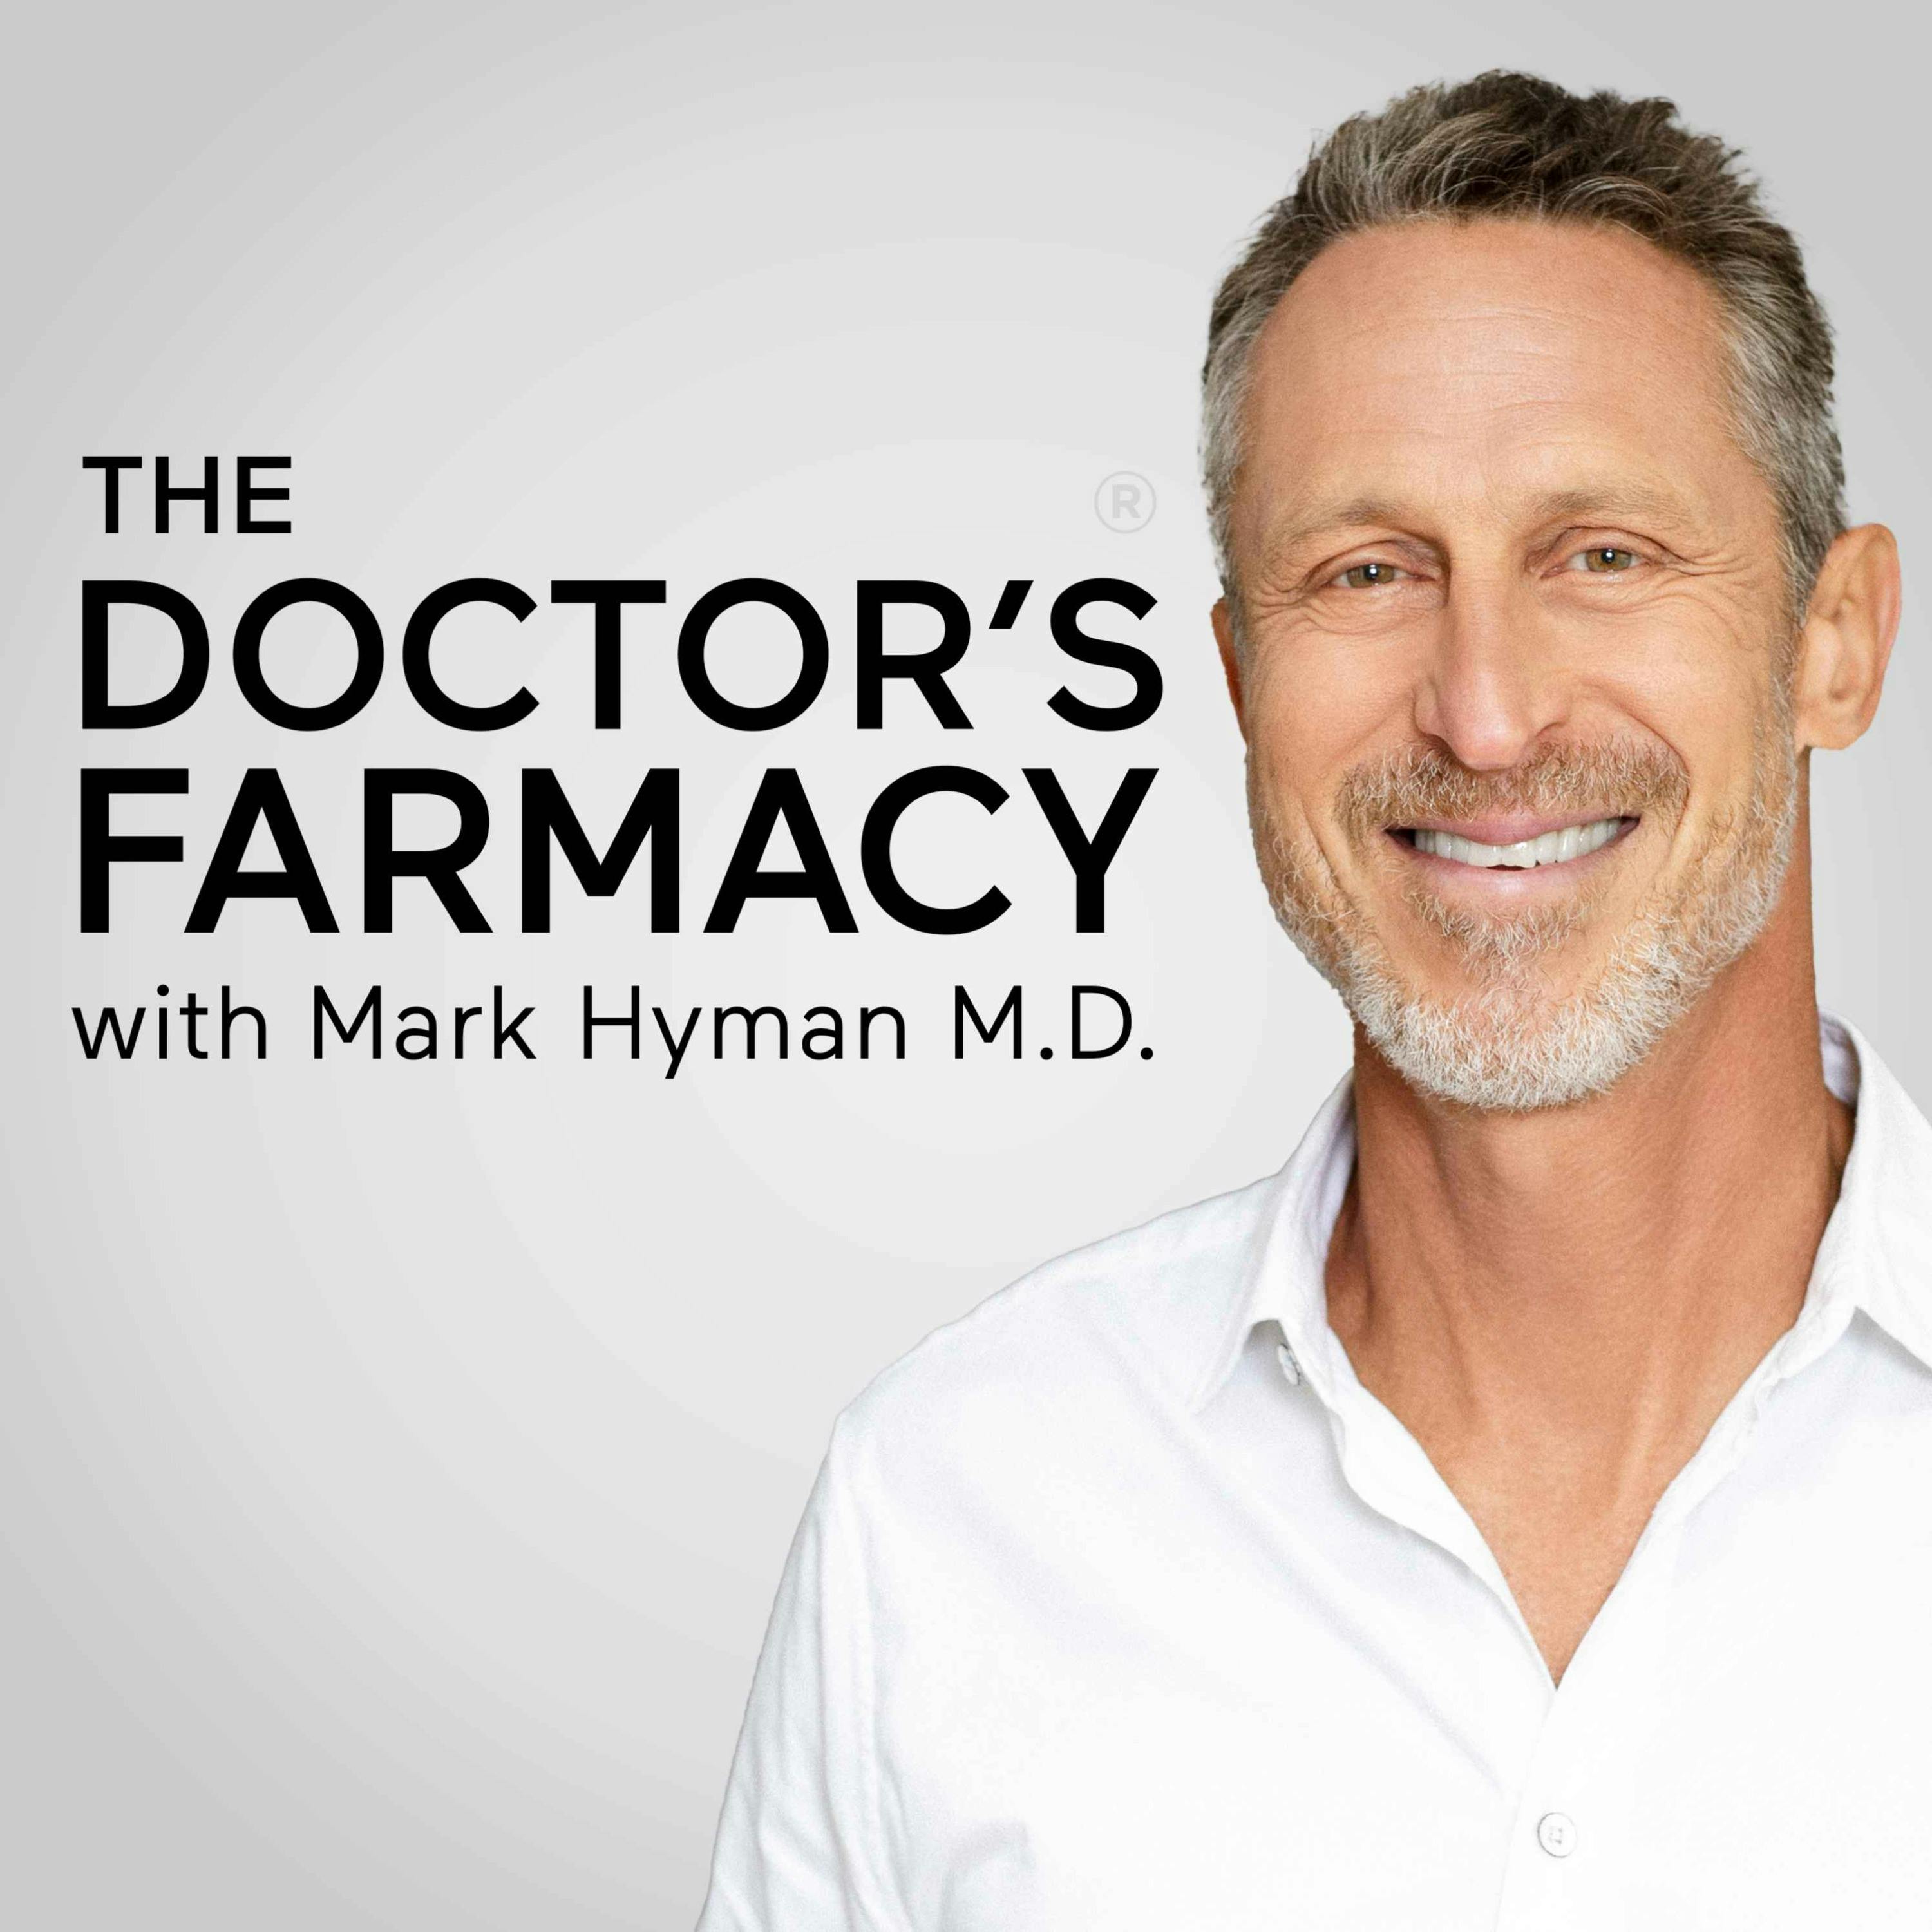 Exclusive Dr. Hyman+ Ask A Doctor: Breast Cancer, Peripheral Neuropathy, And More